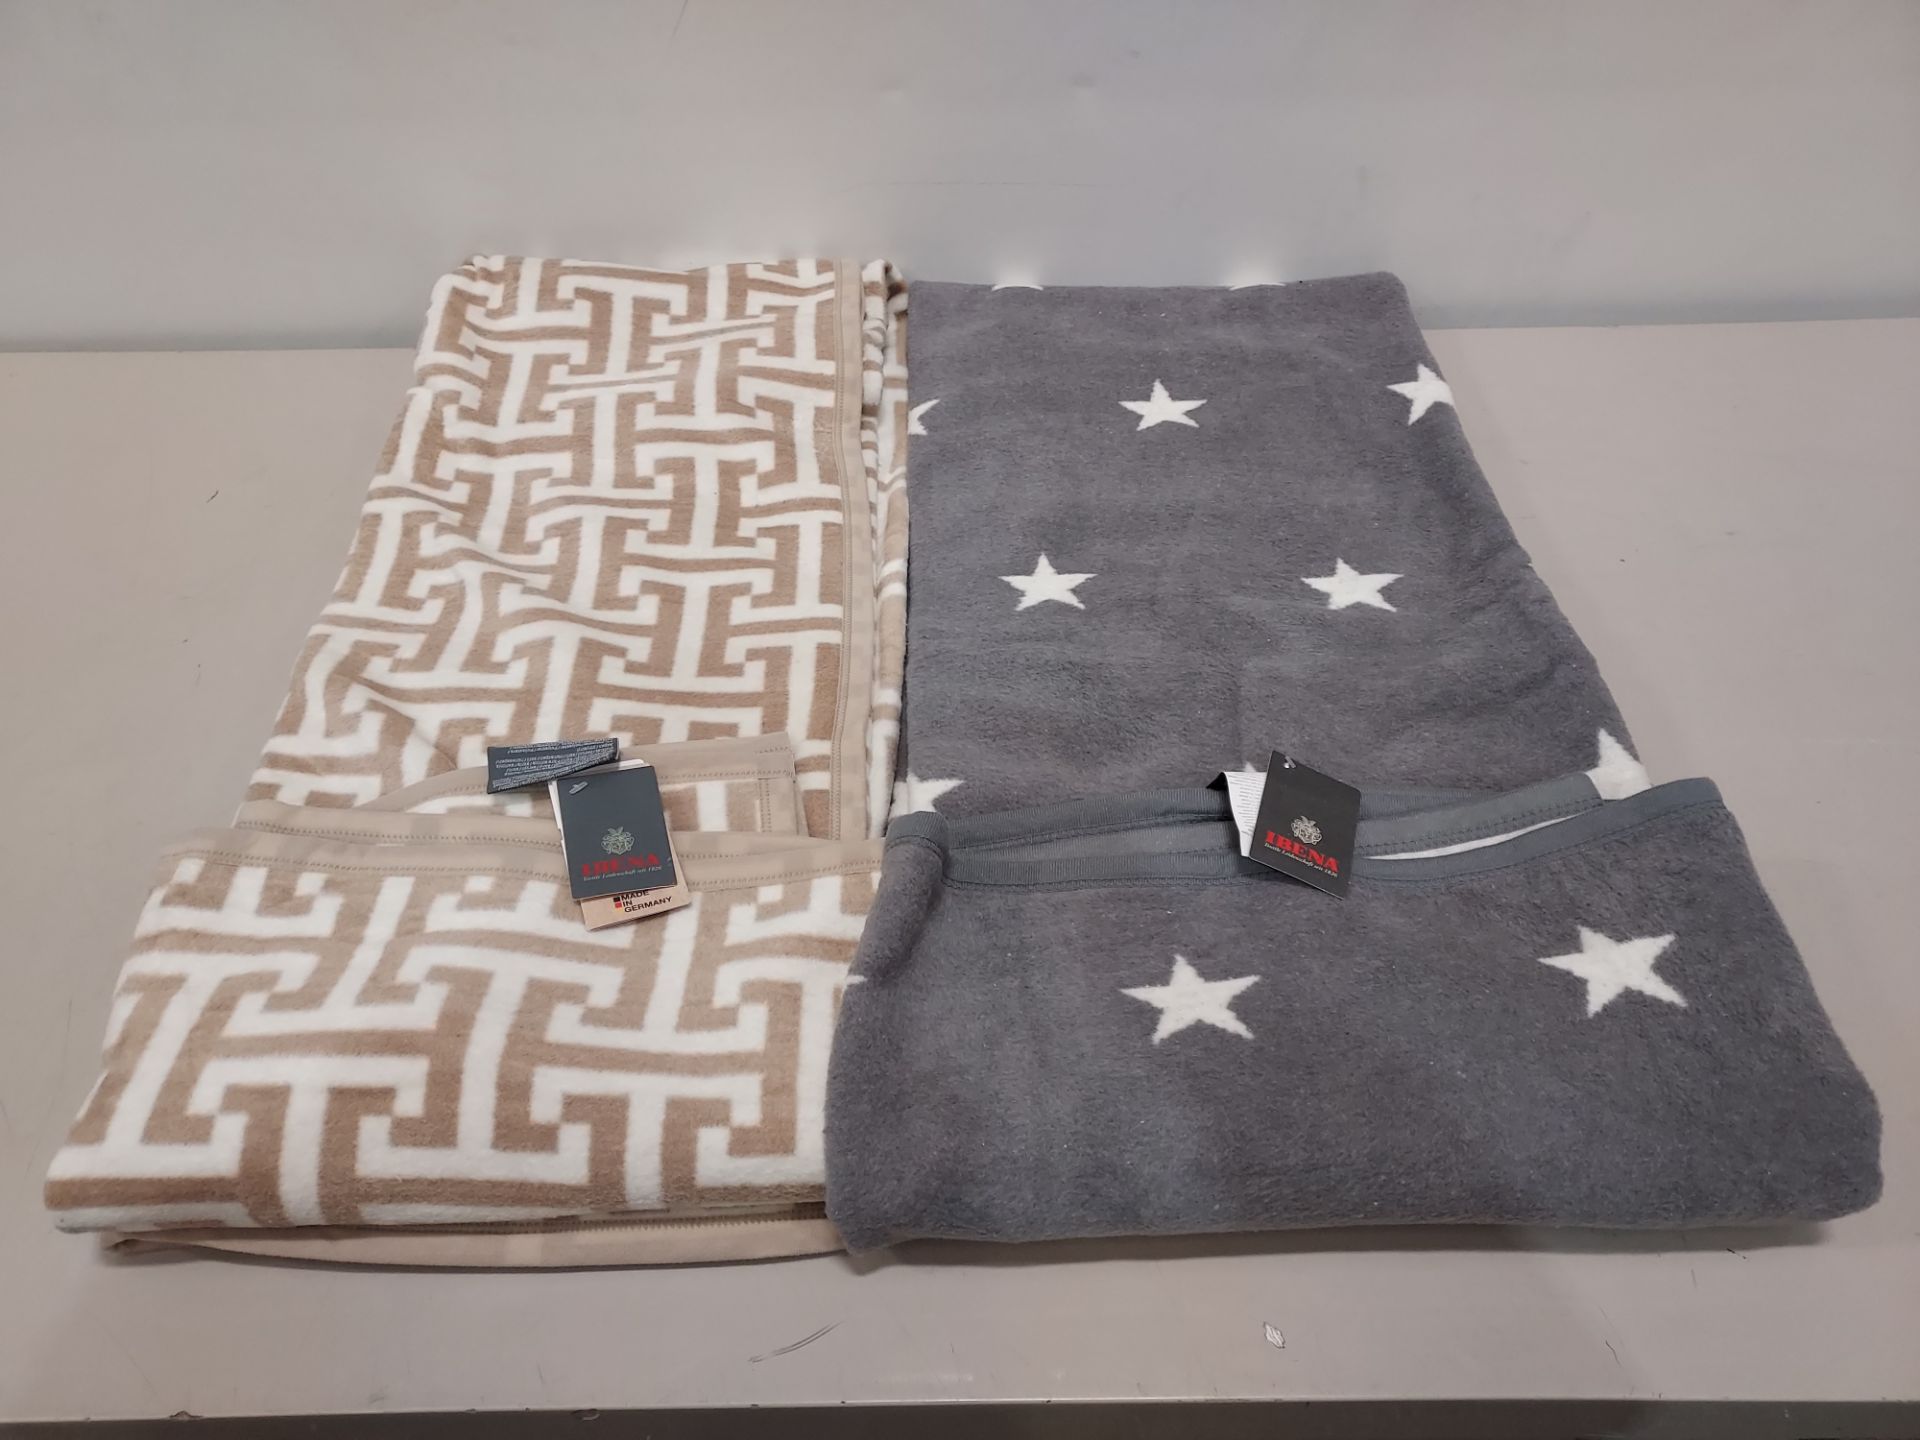 10 X BRAND NEW IBENA BLANKETS IN 2 STYLES TO INCLUDE STAR AND SQUARE - IN 2 COLOURS TO INCLUDE